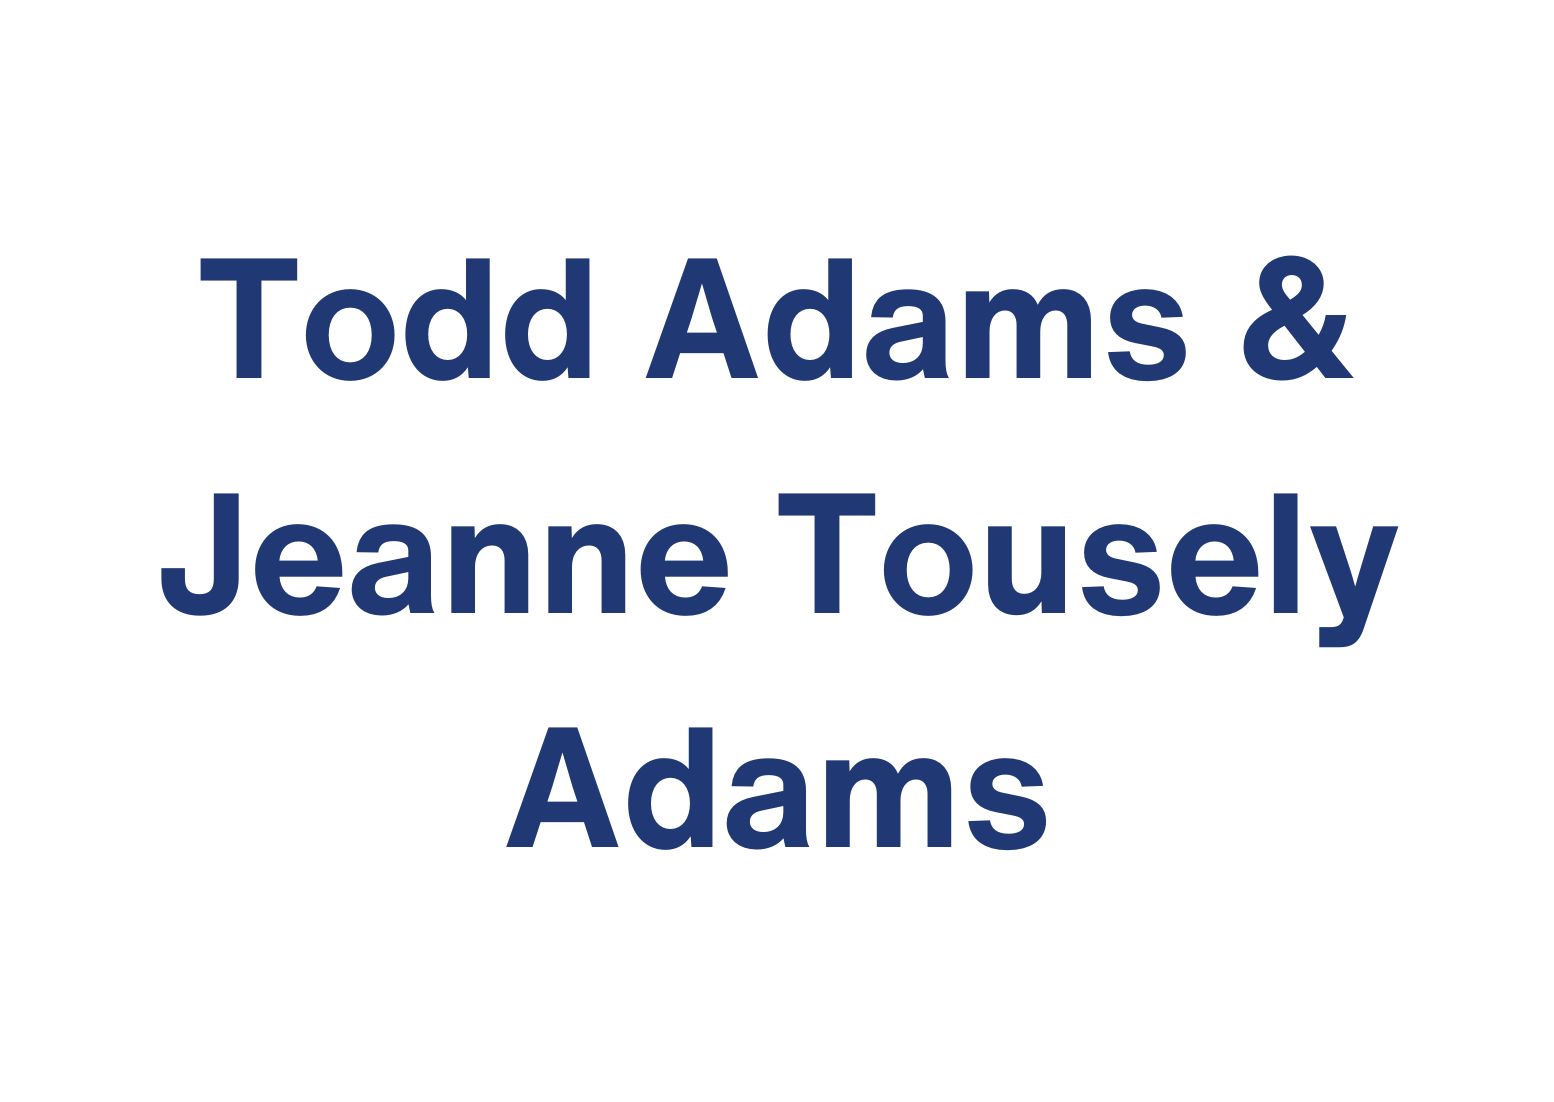 Todd Adams & Jeanne Tousely Adams